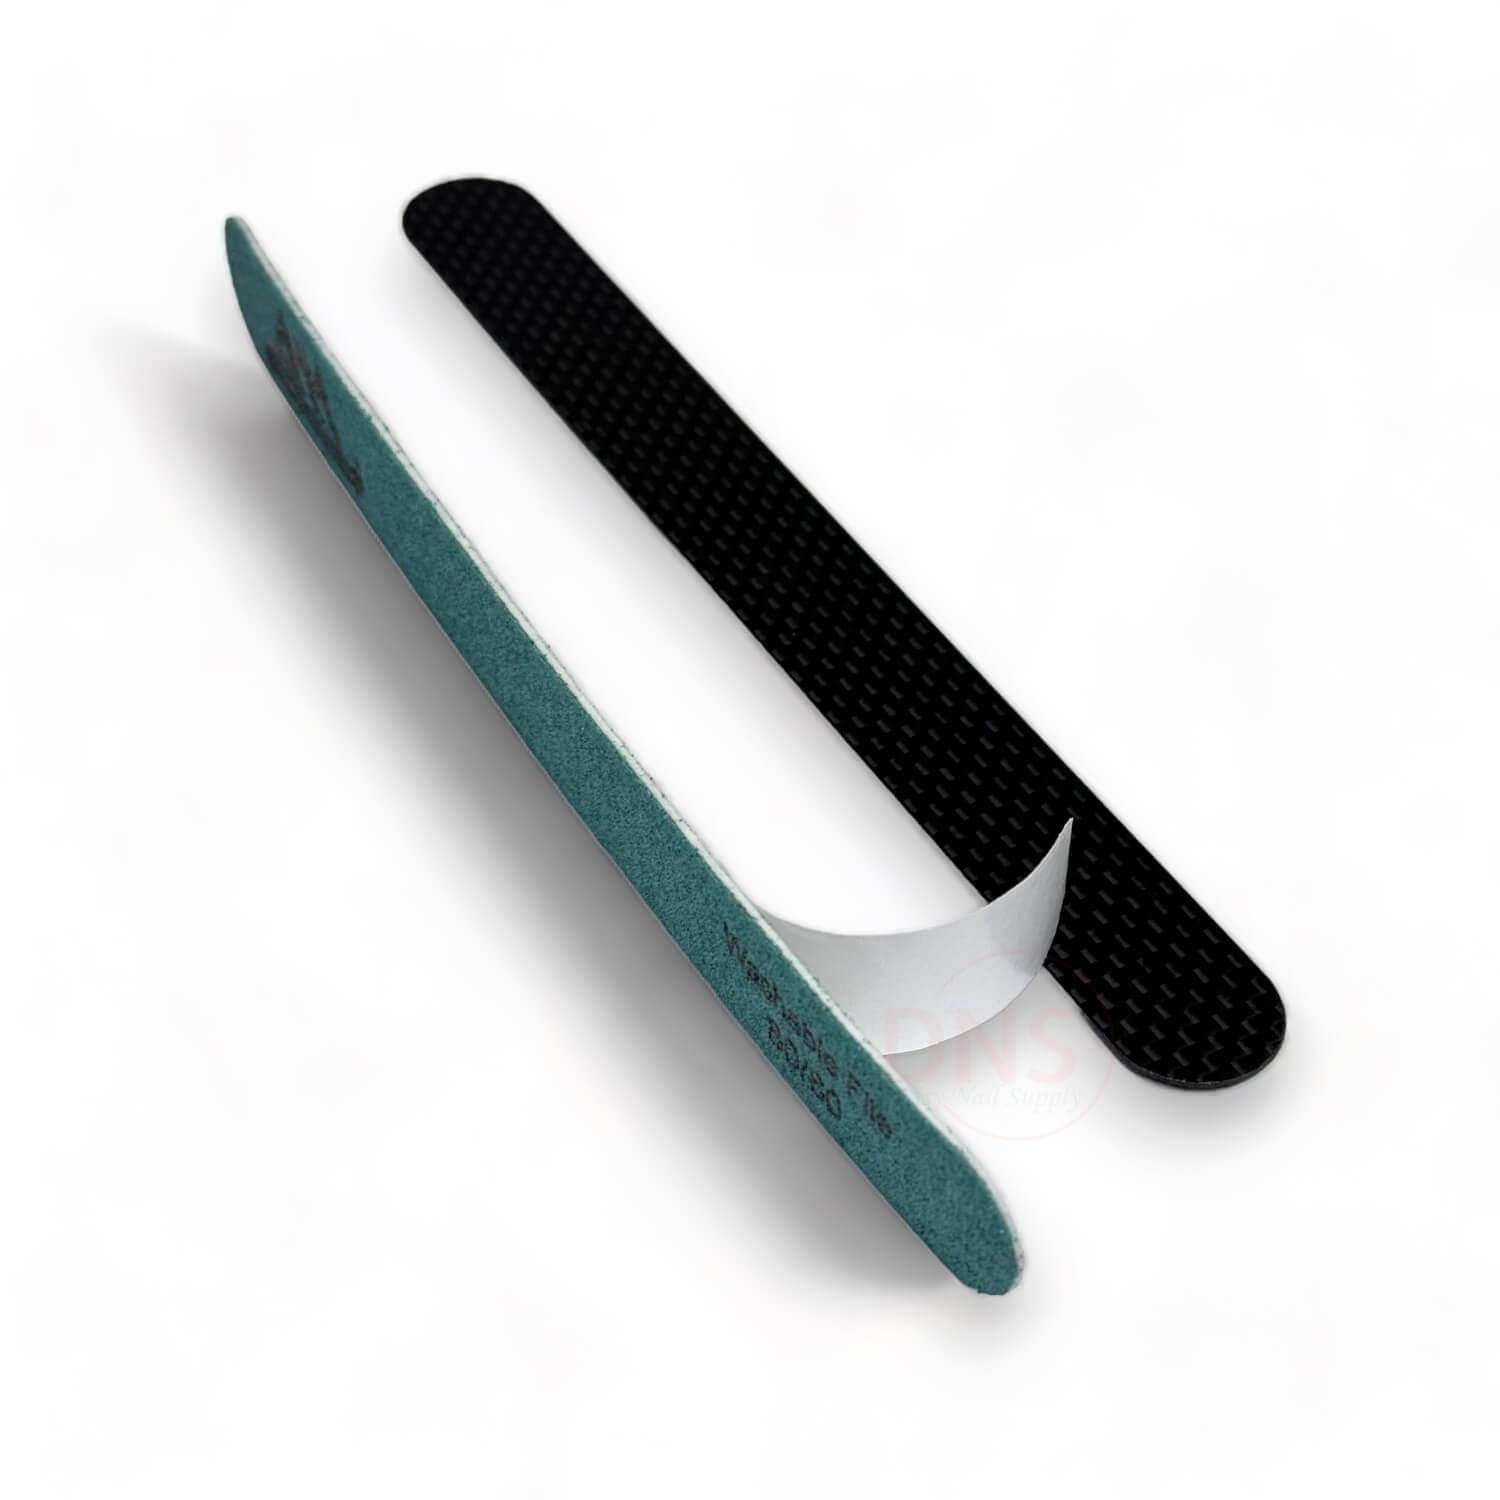 Pyramid Acrylic Nail File - Blue Straight-Tape 80/80 grit (80_Files + 1 Black Carbon Tape)